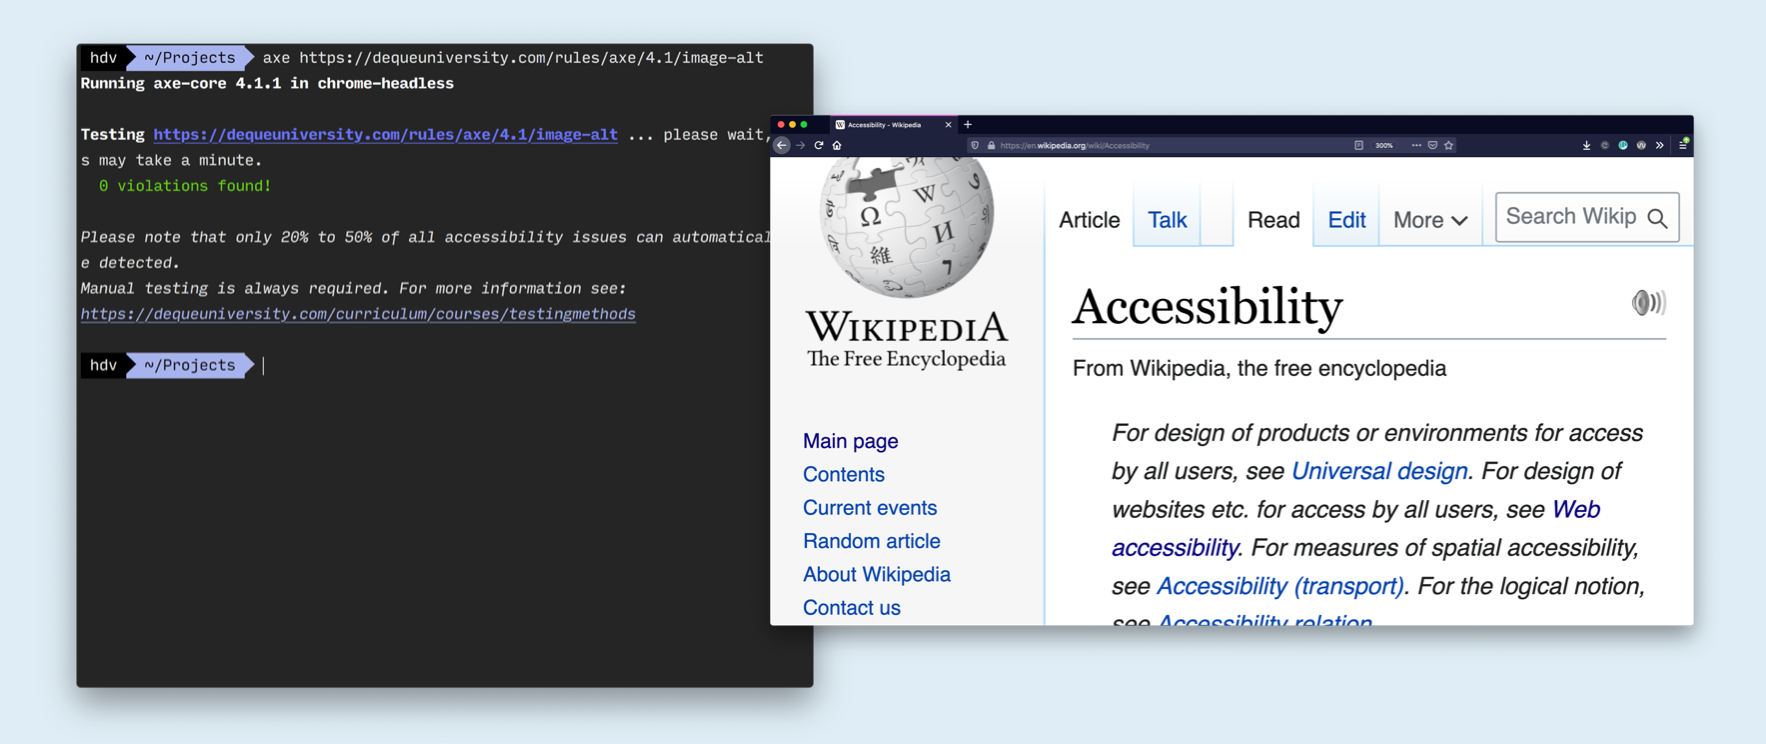 screenshot of terminal window running axe and another screenshot of wikipedia zoomed in 300%